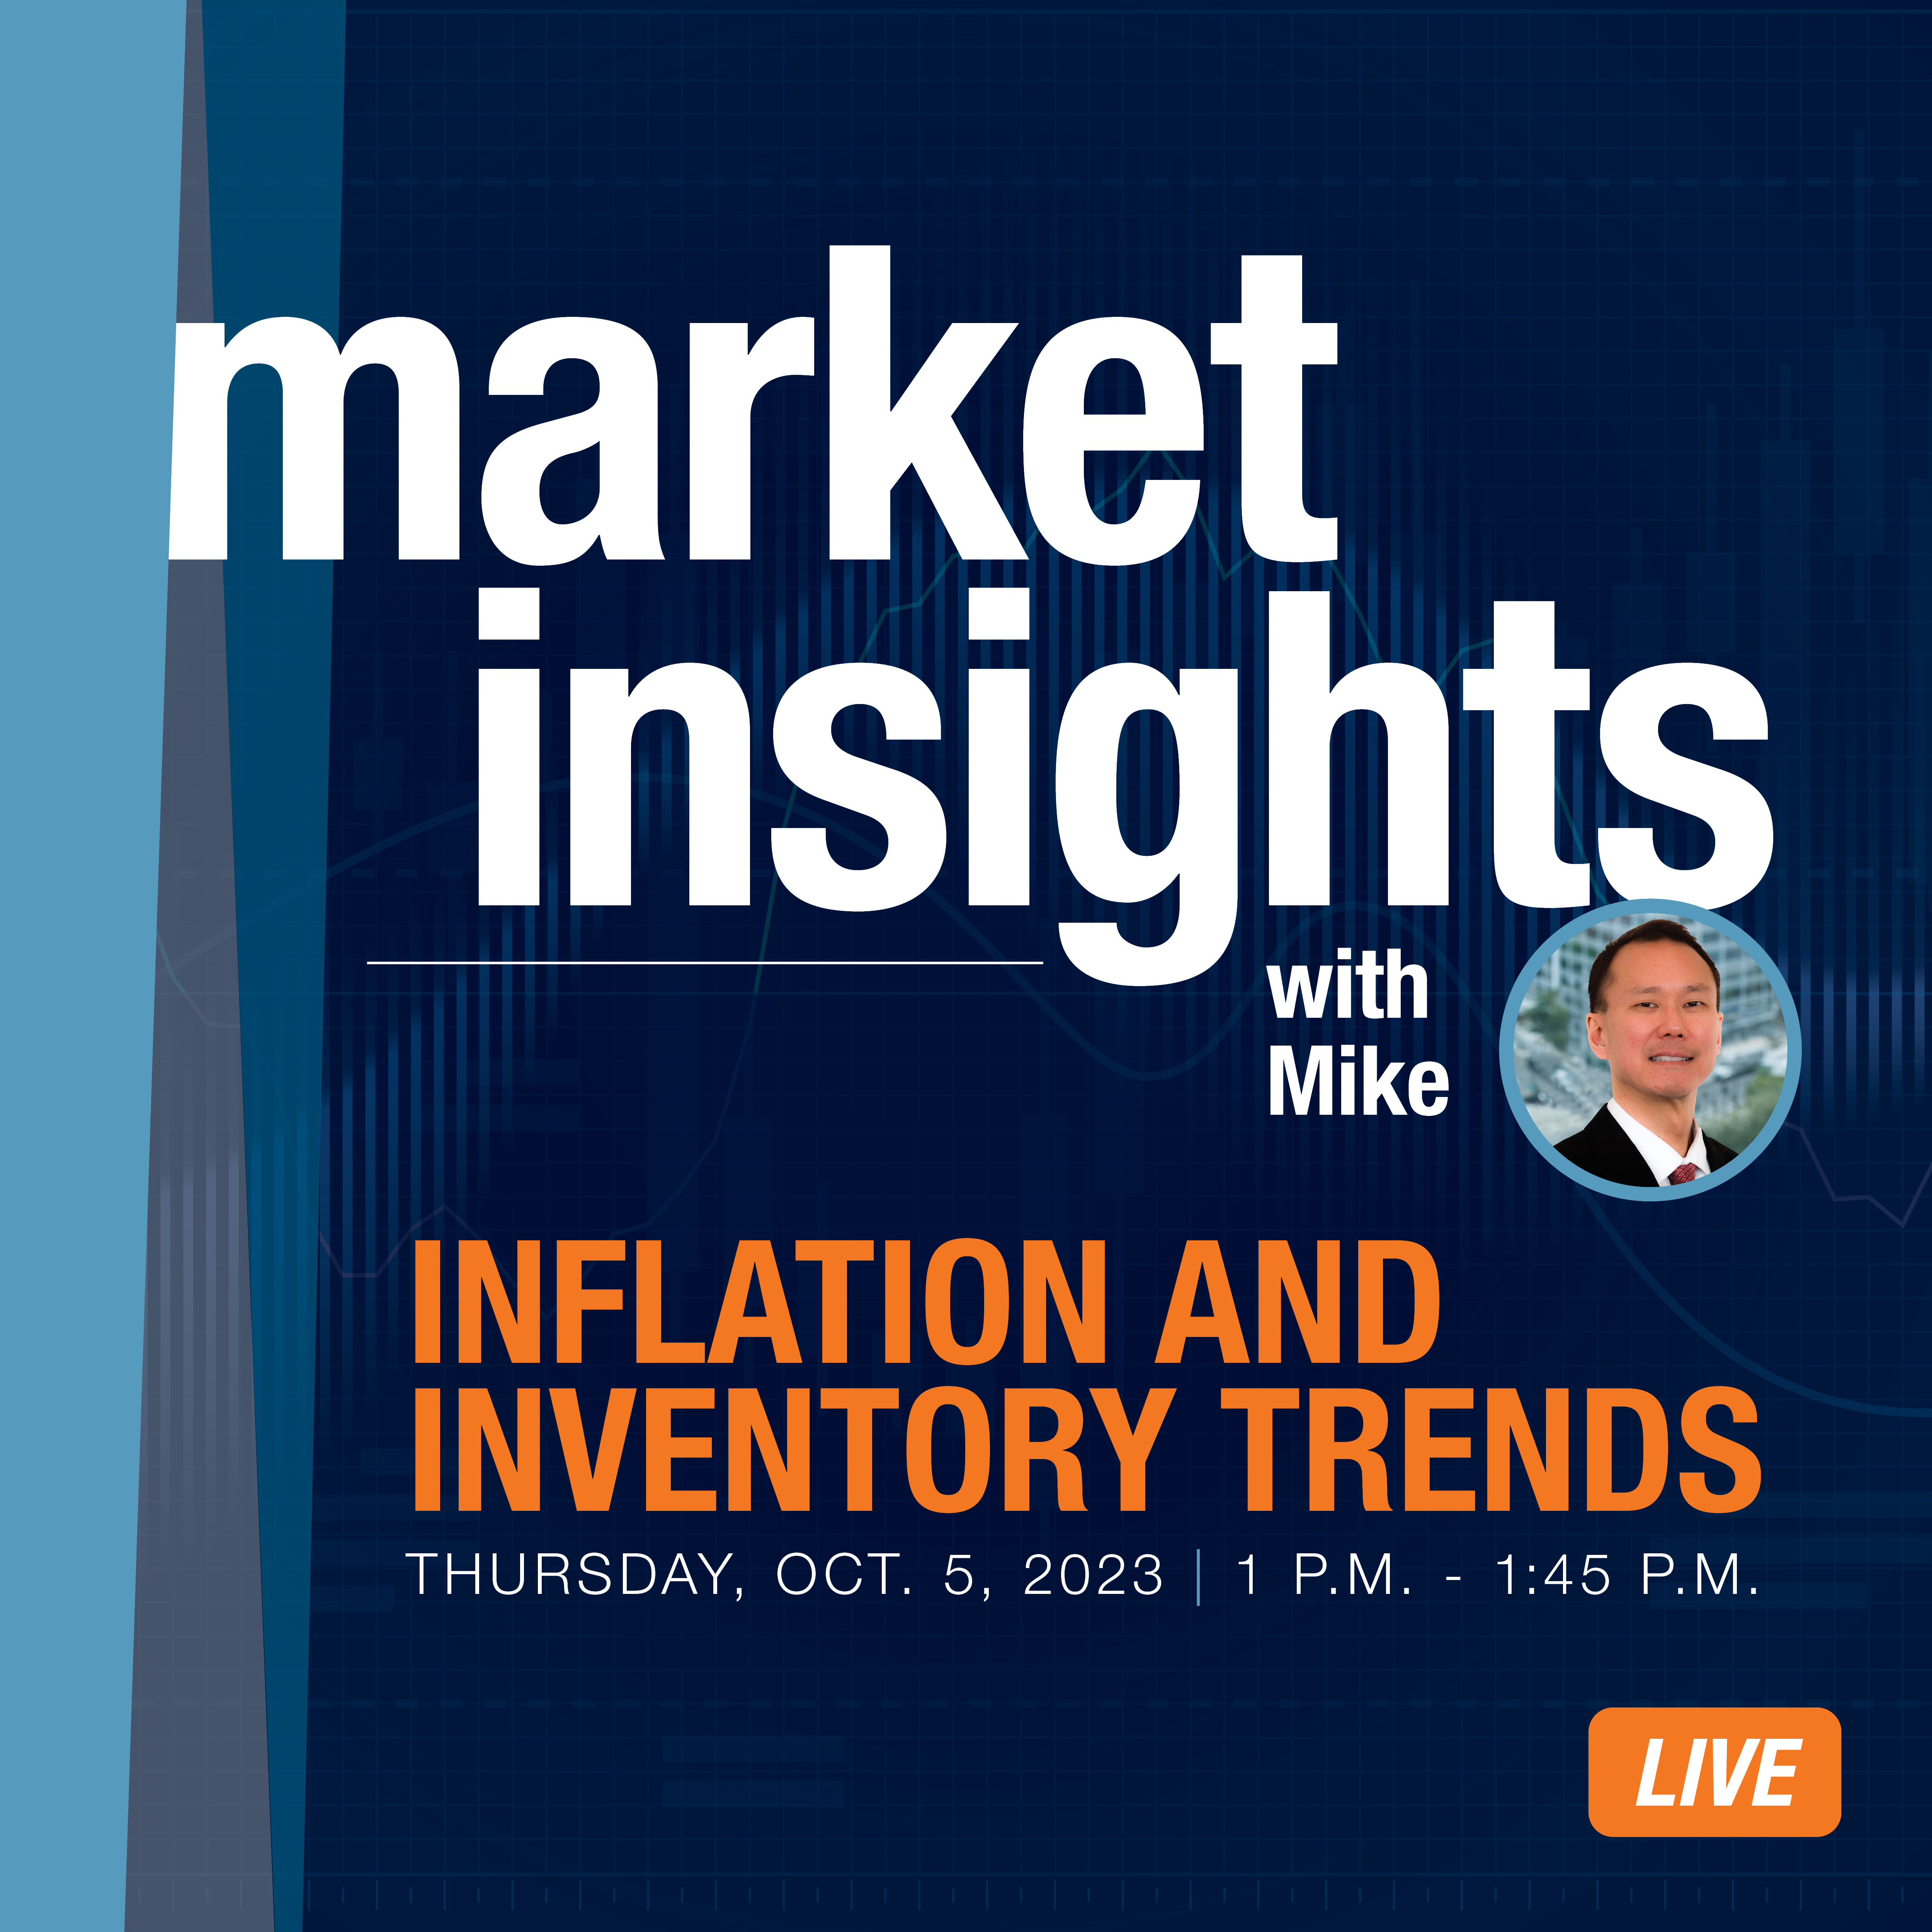 Image for Market Insights with Mike Live webinar on inflation and inventory management trends